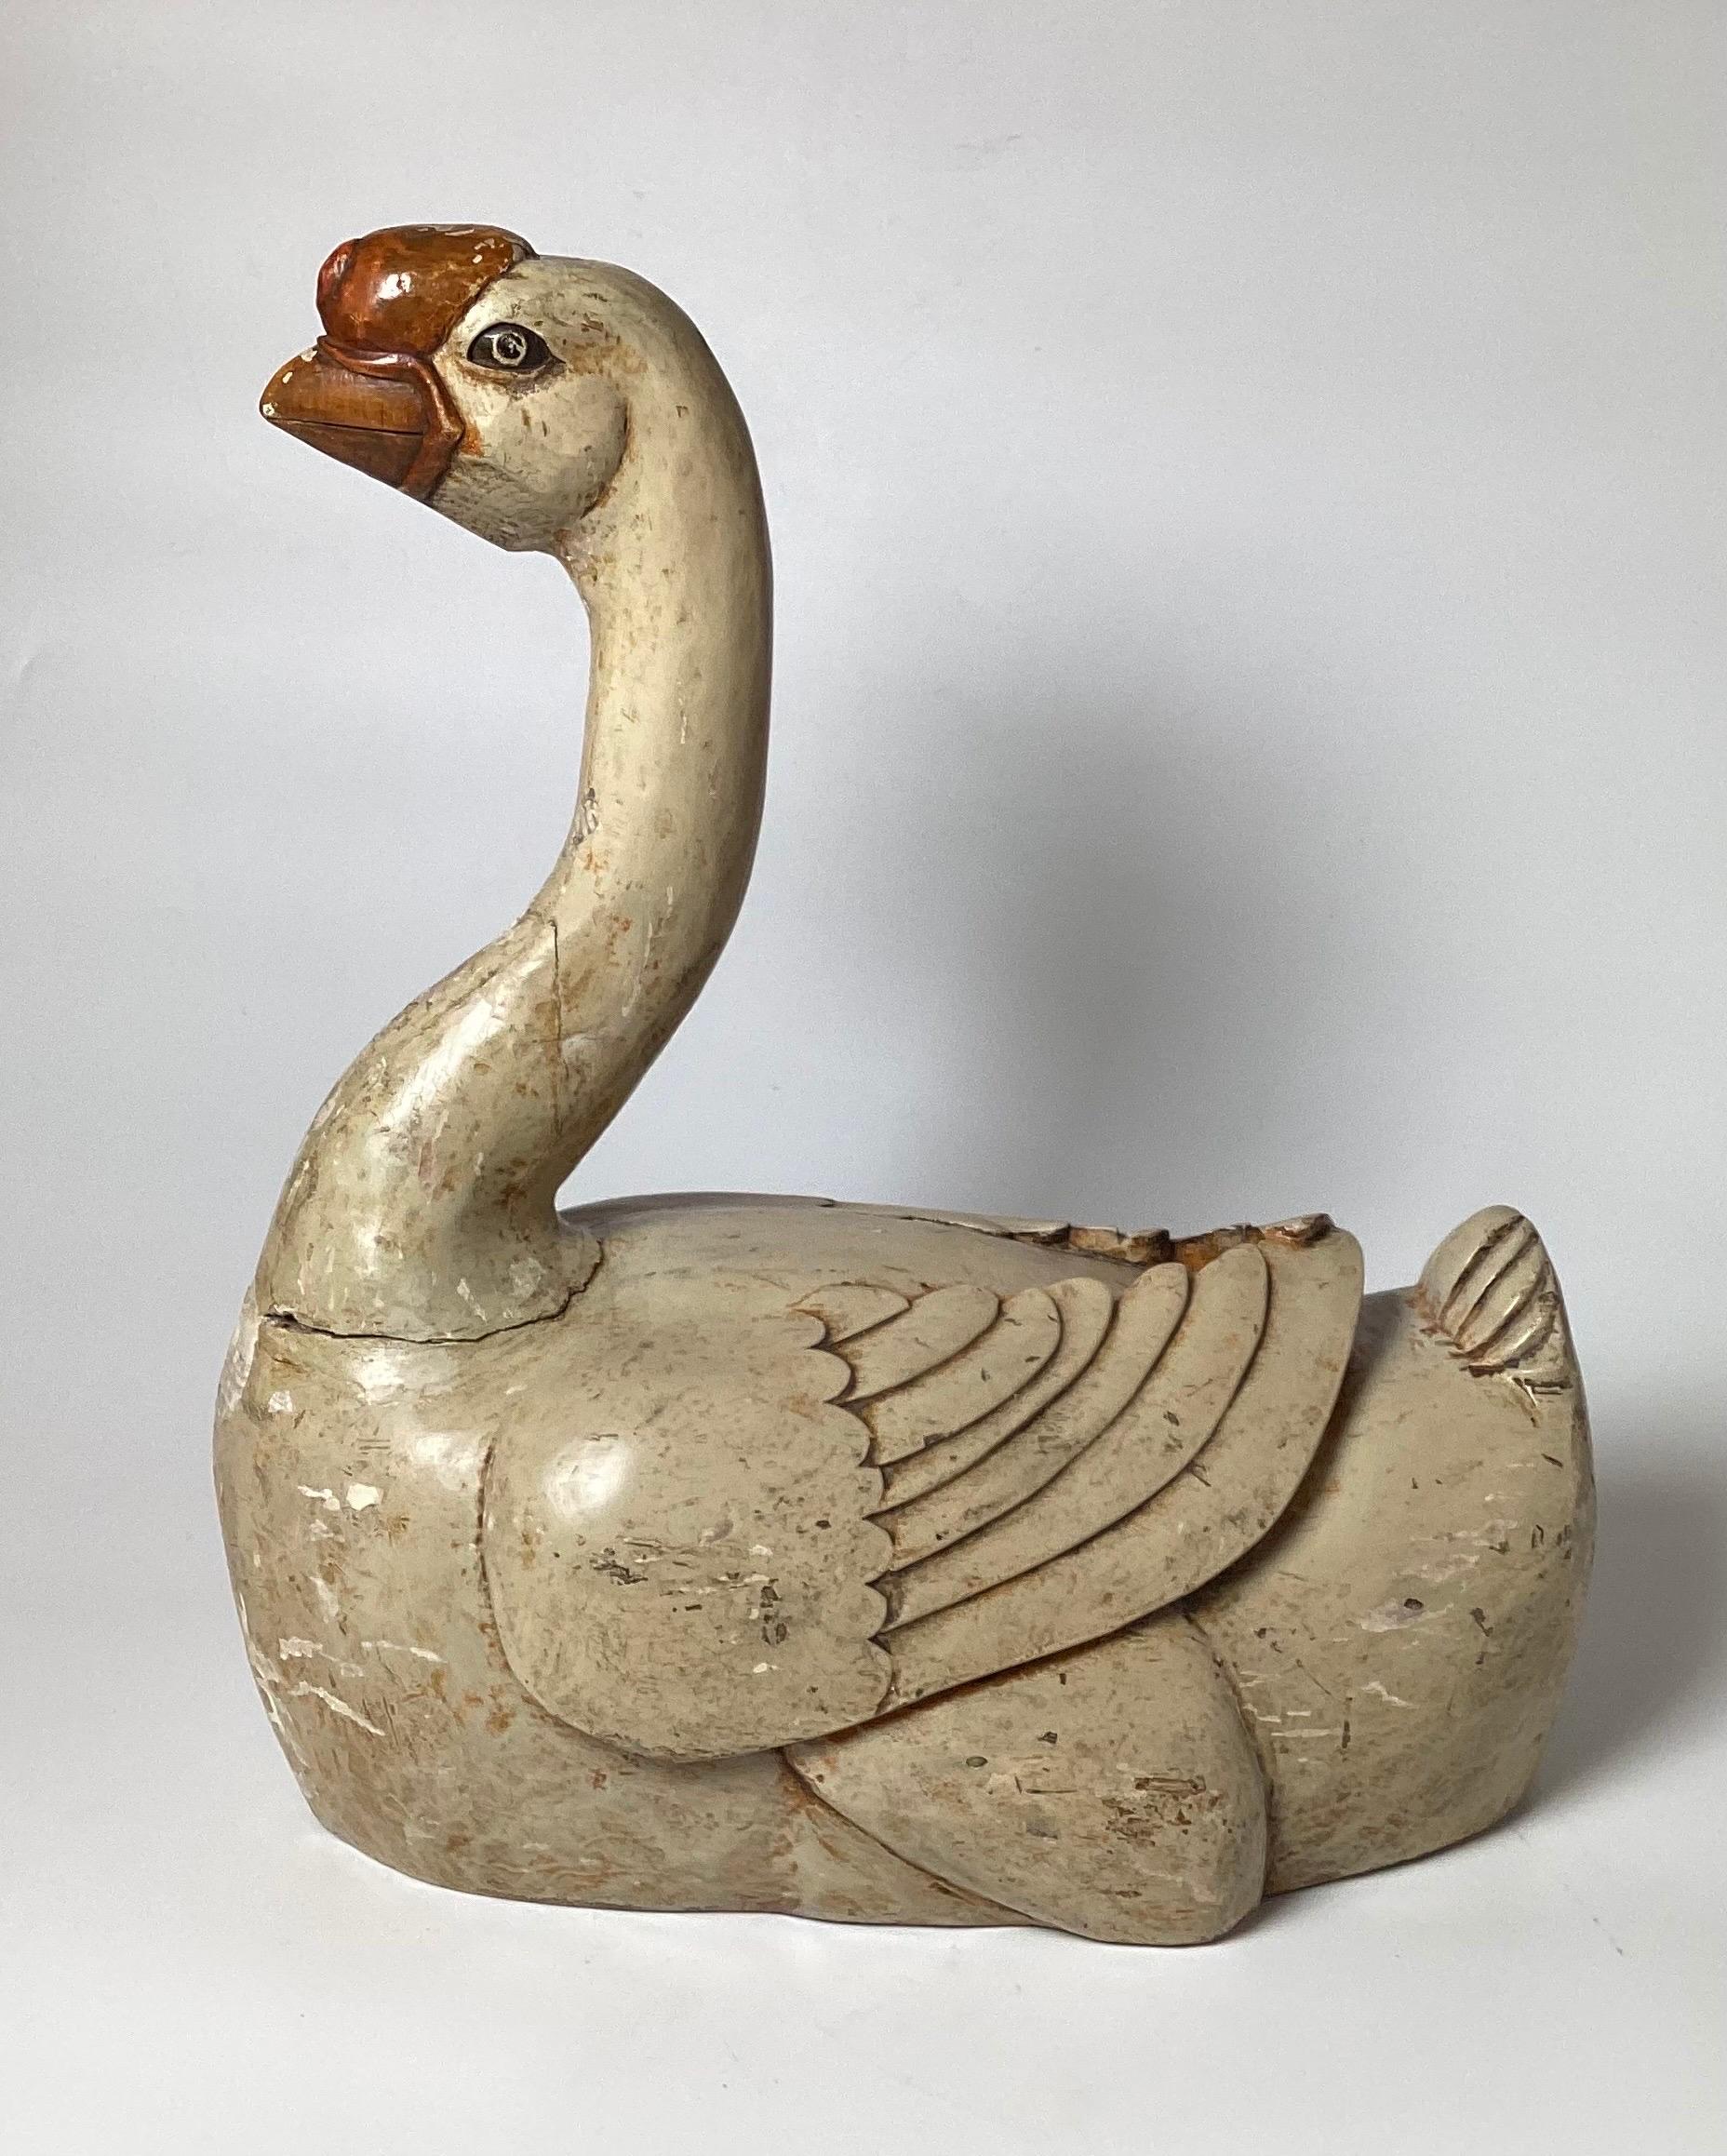 A rare Antique hand carved and painted 19th century Chinese figure of a Basal Knob goose. The figure retaining most of its original paint over gesso with flaking and cracking to the original finish.